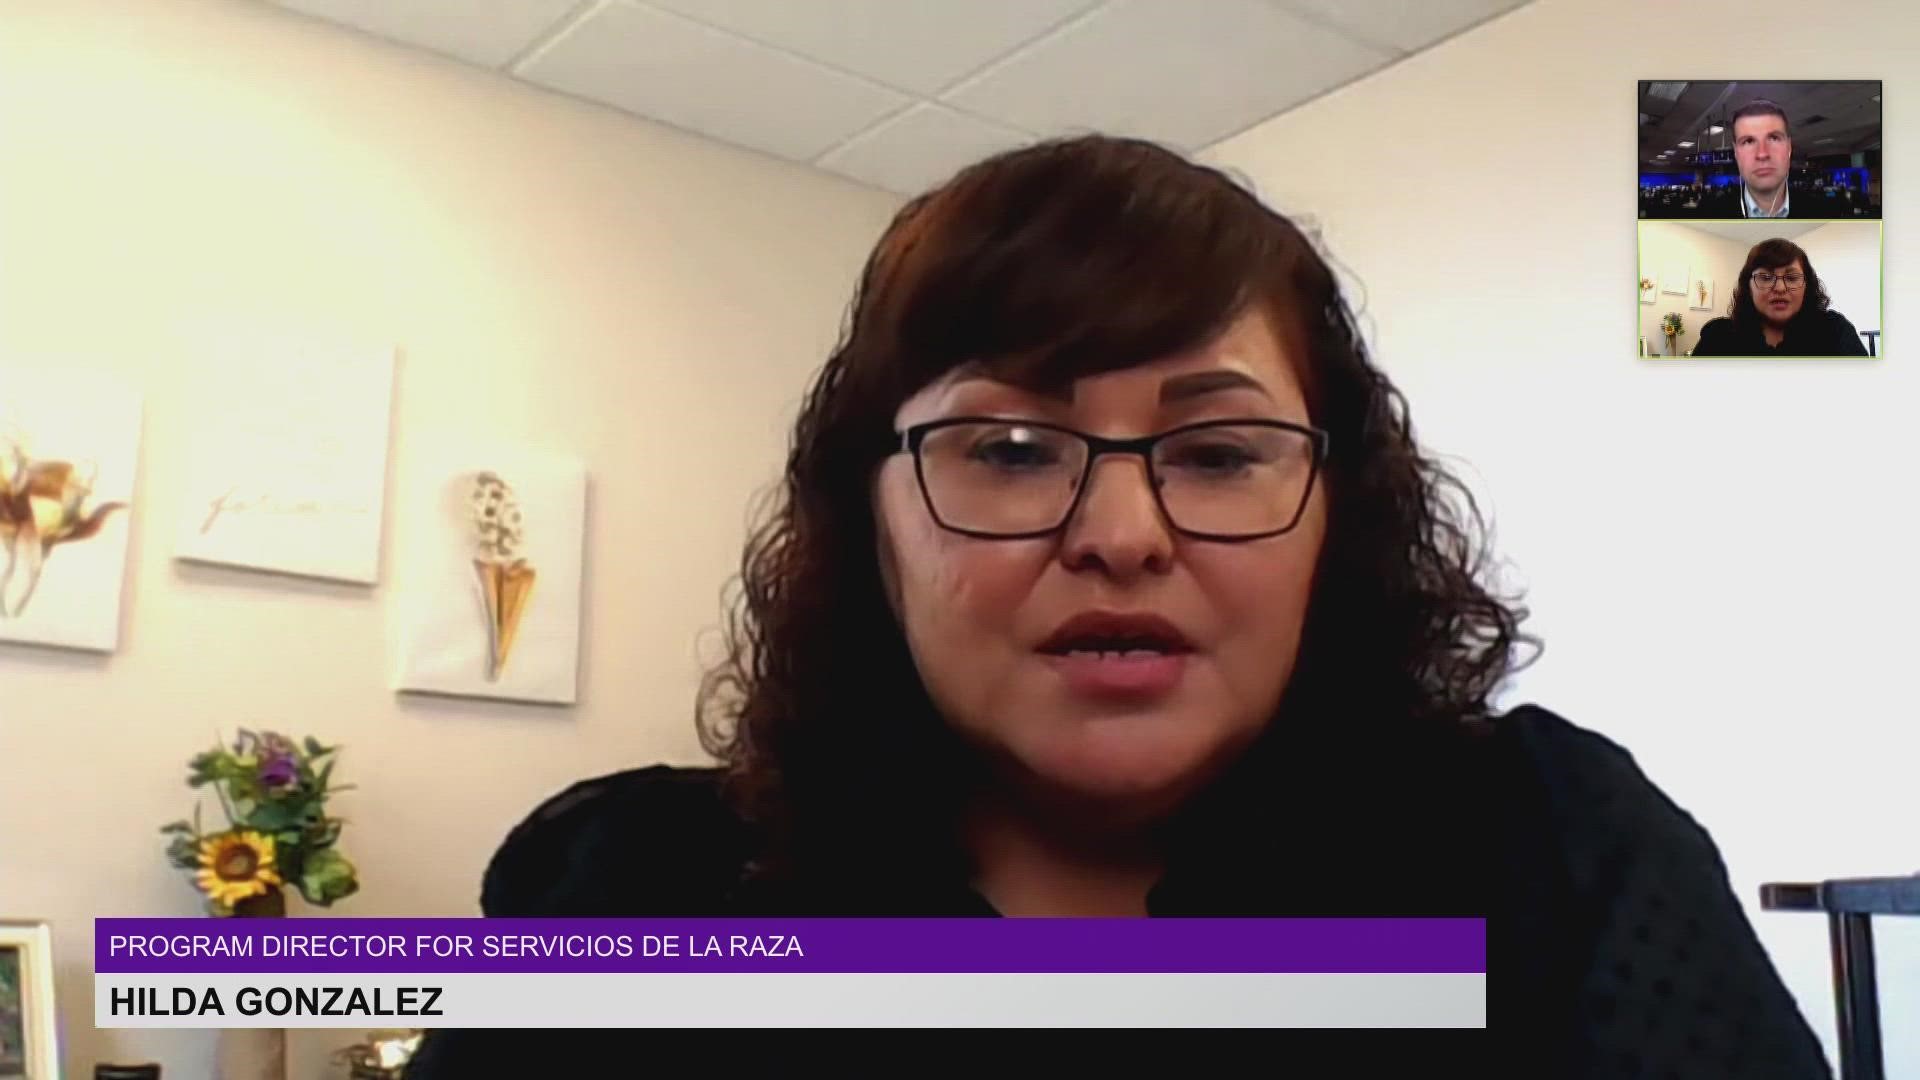 Servicios de la Raza spoke with 9NEWS about how residents can plan ahead of the end of Colorado's public health emergency as COVID-19 cases drop.